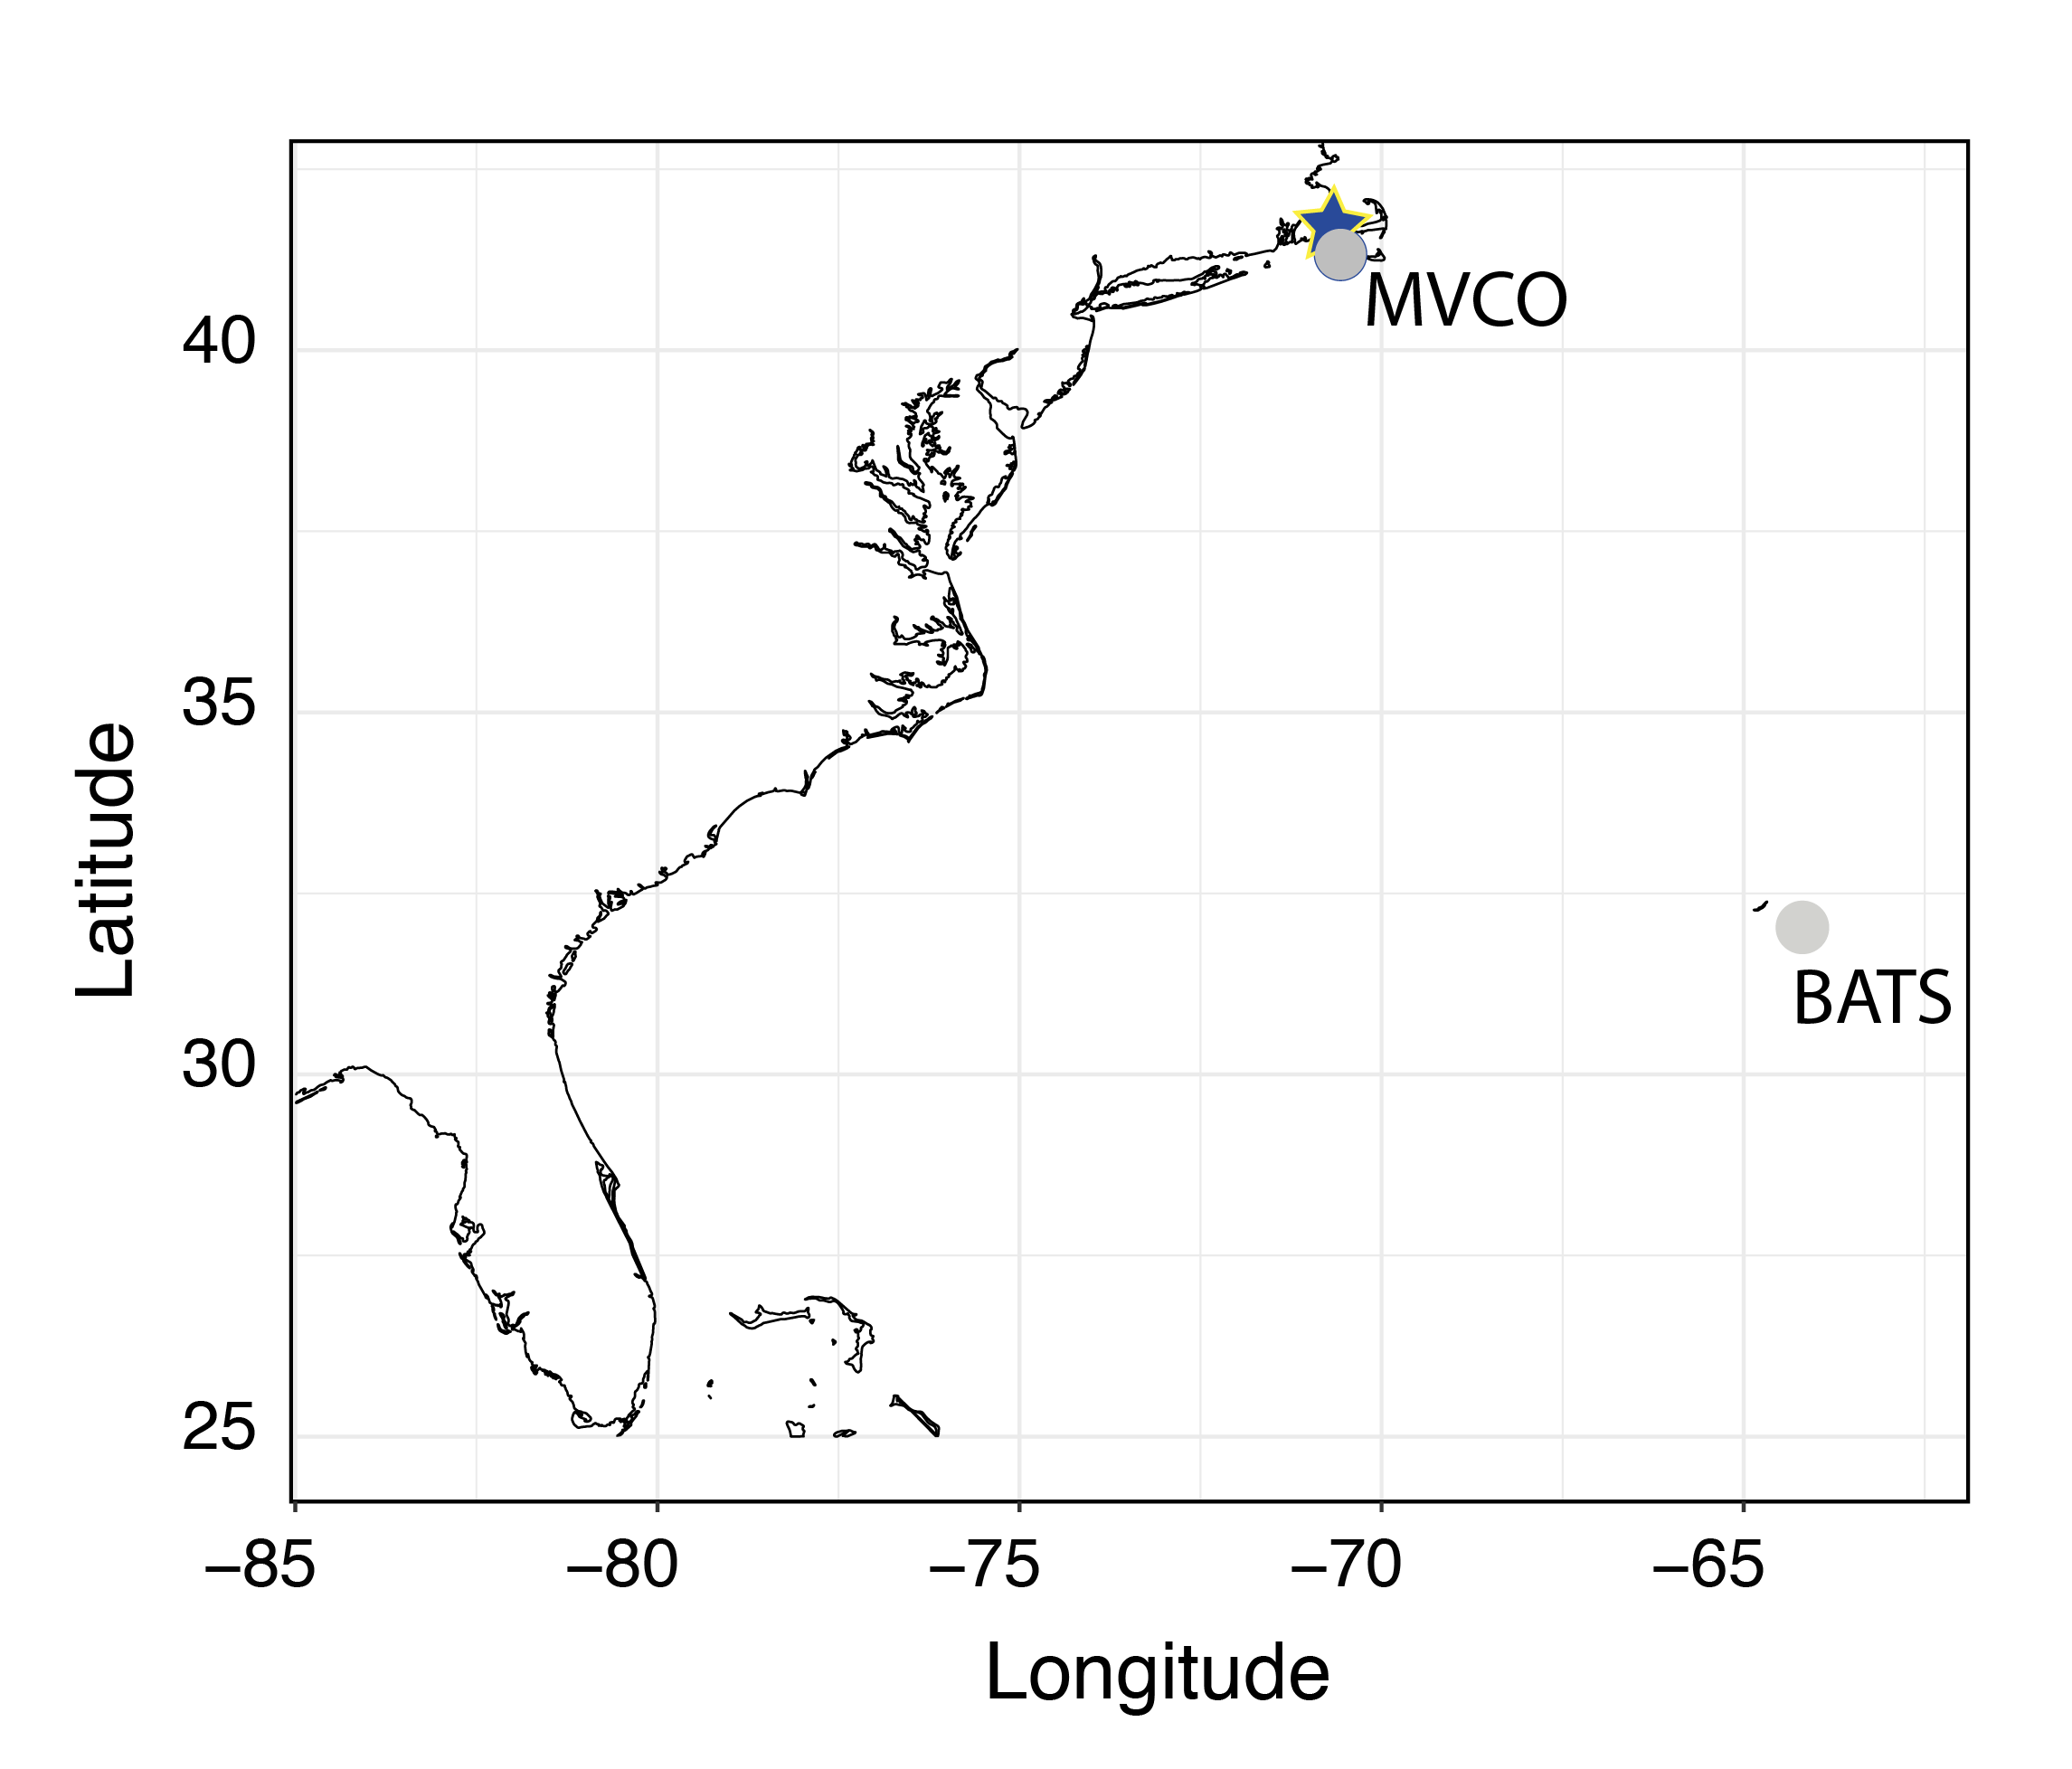 The field sites for Martha's Vineyard Coastal Observatory (MVCO) and the Bermuda Atlantic Time-series (BATS) are displayed on this map.